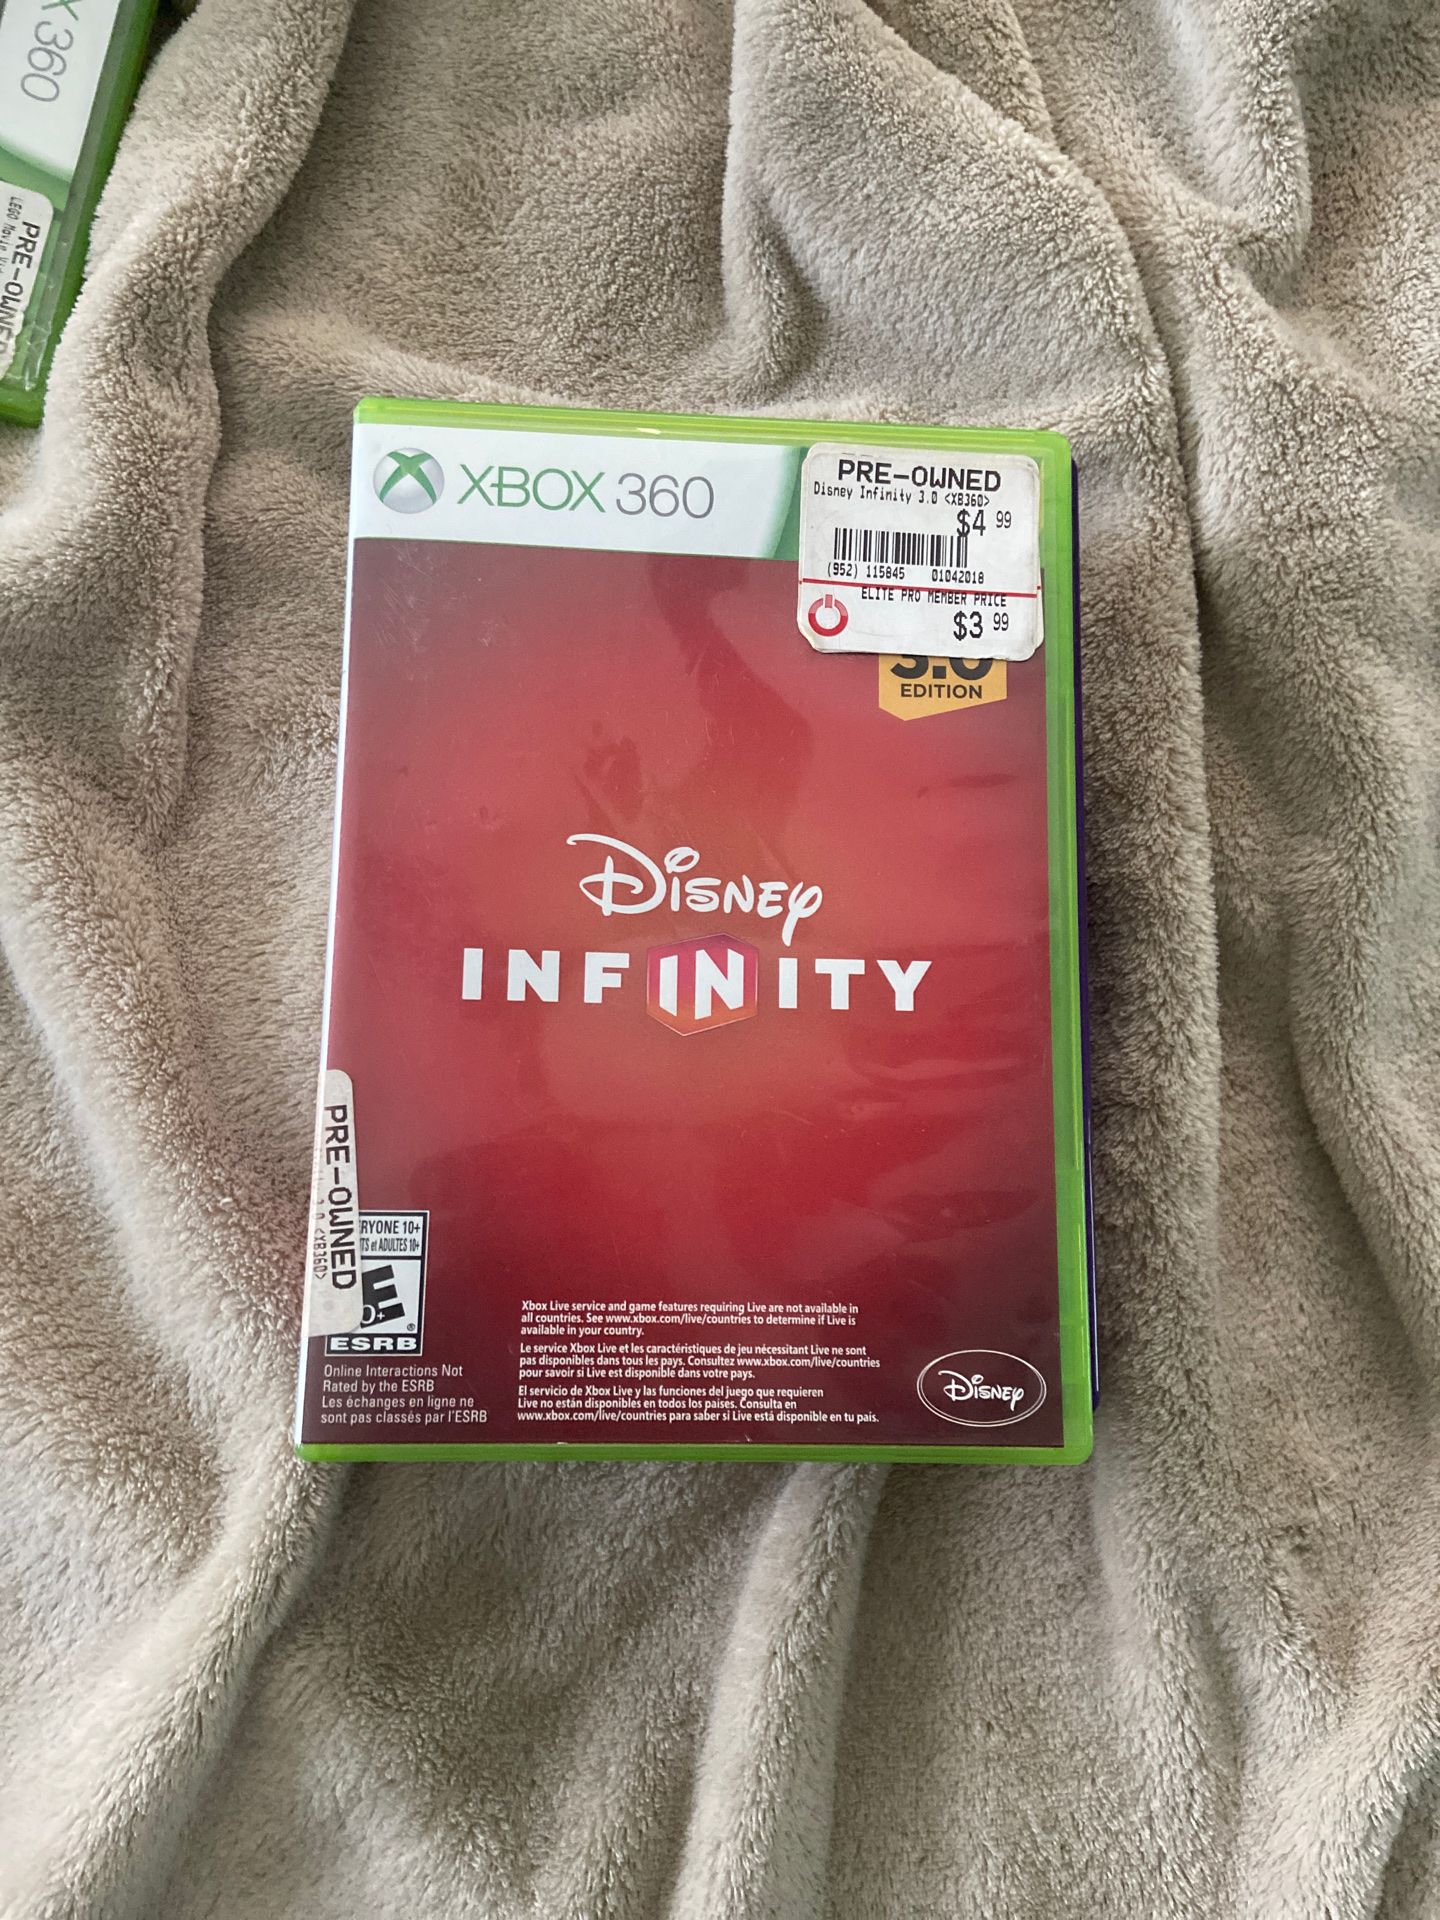 Disney infinity game for Xbox 360 (doesn’t come with characters)